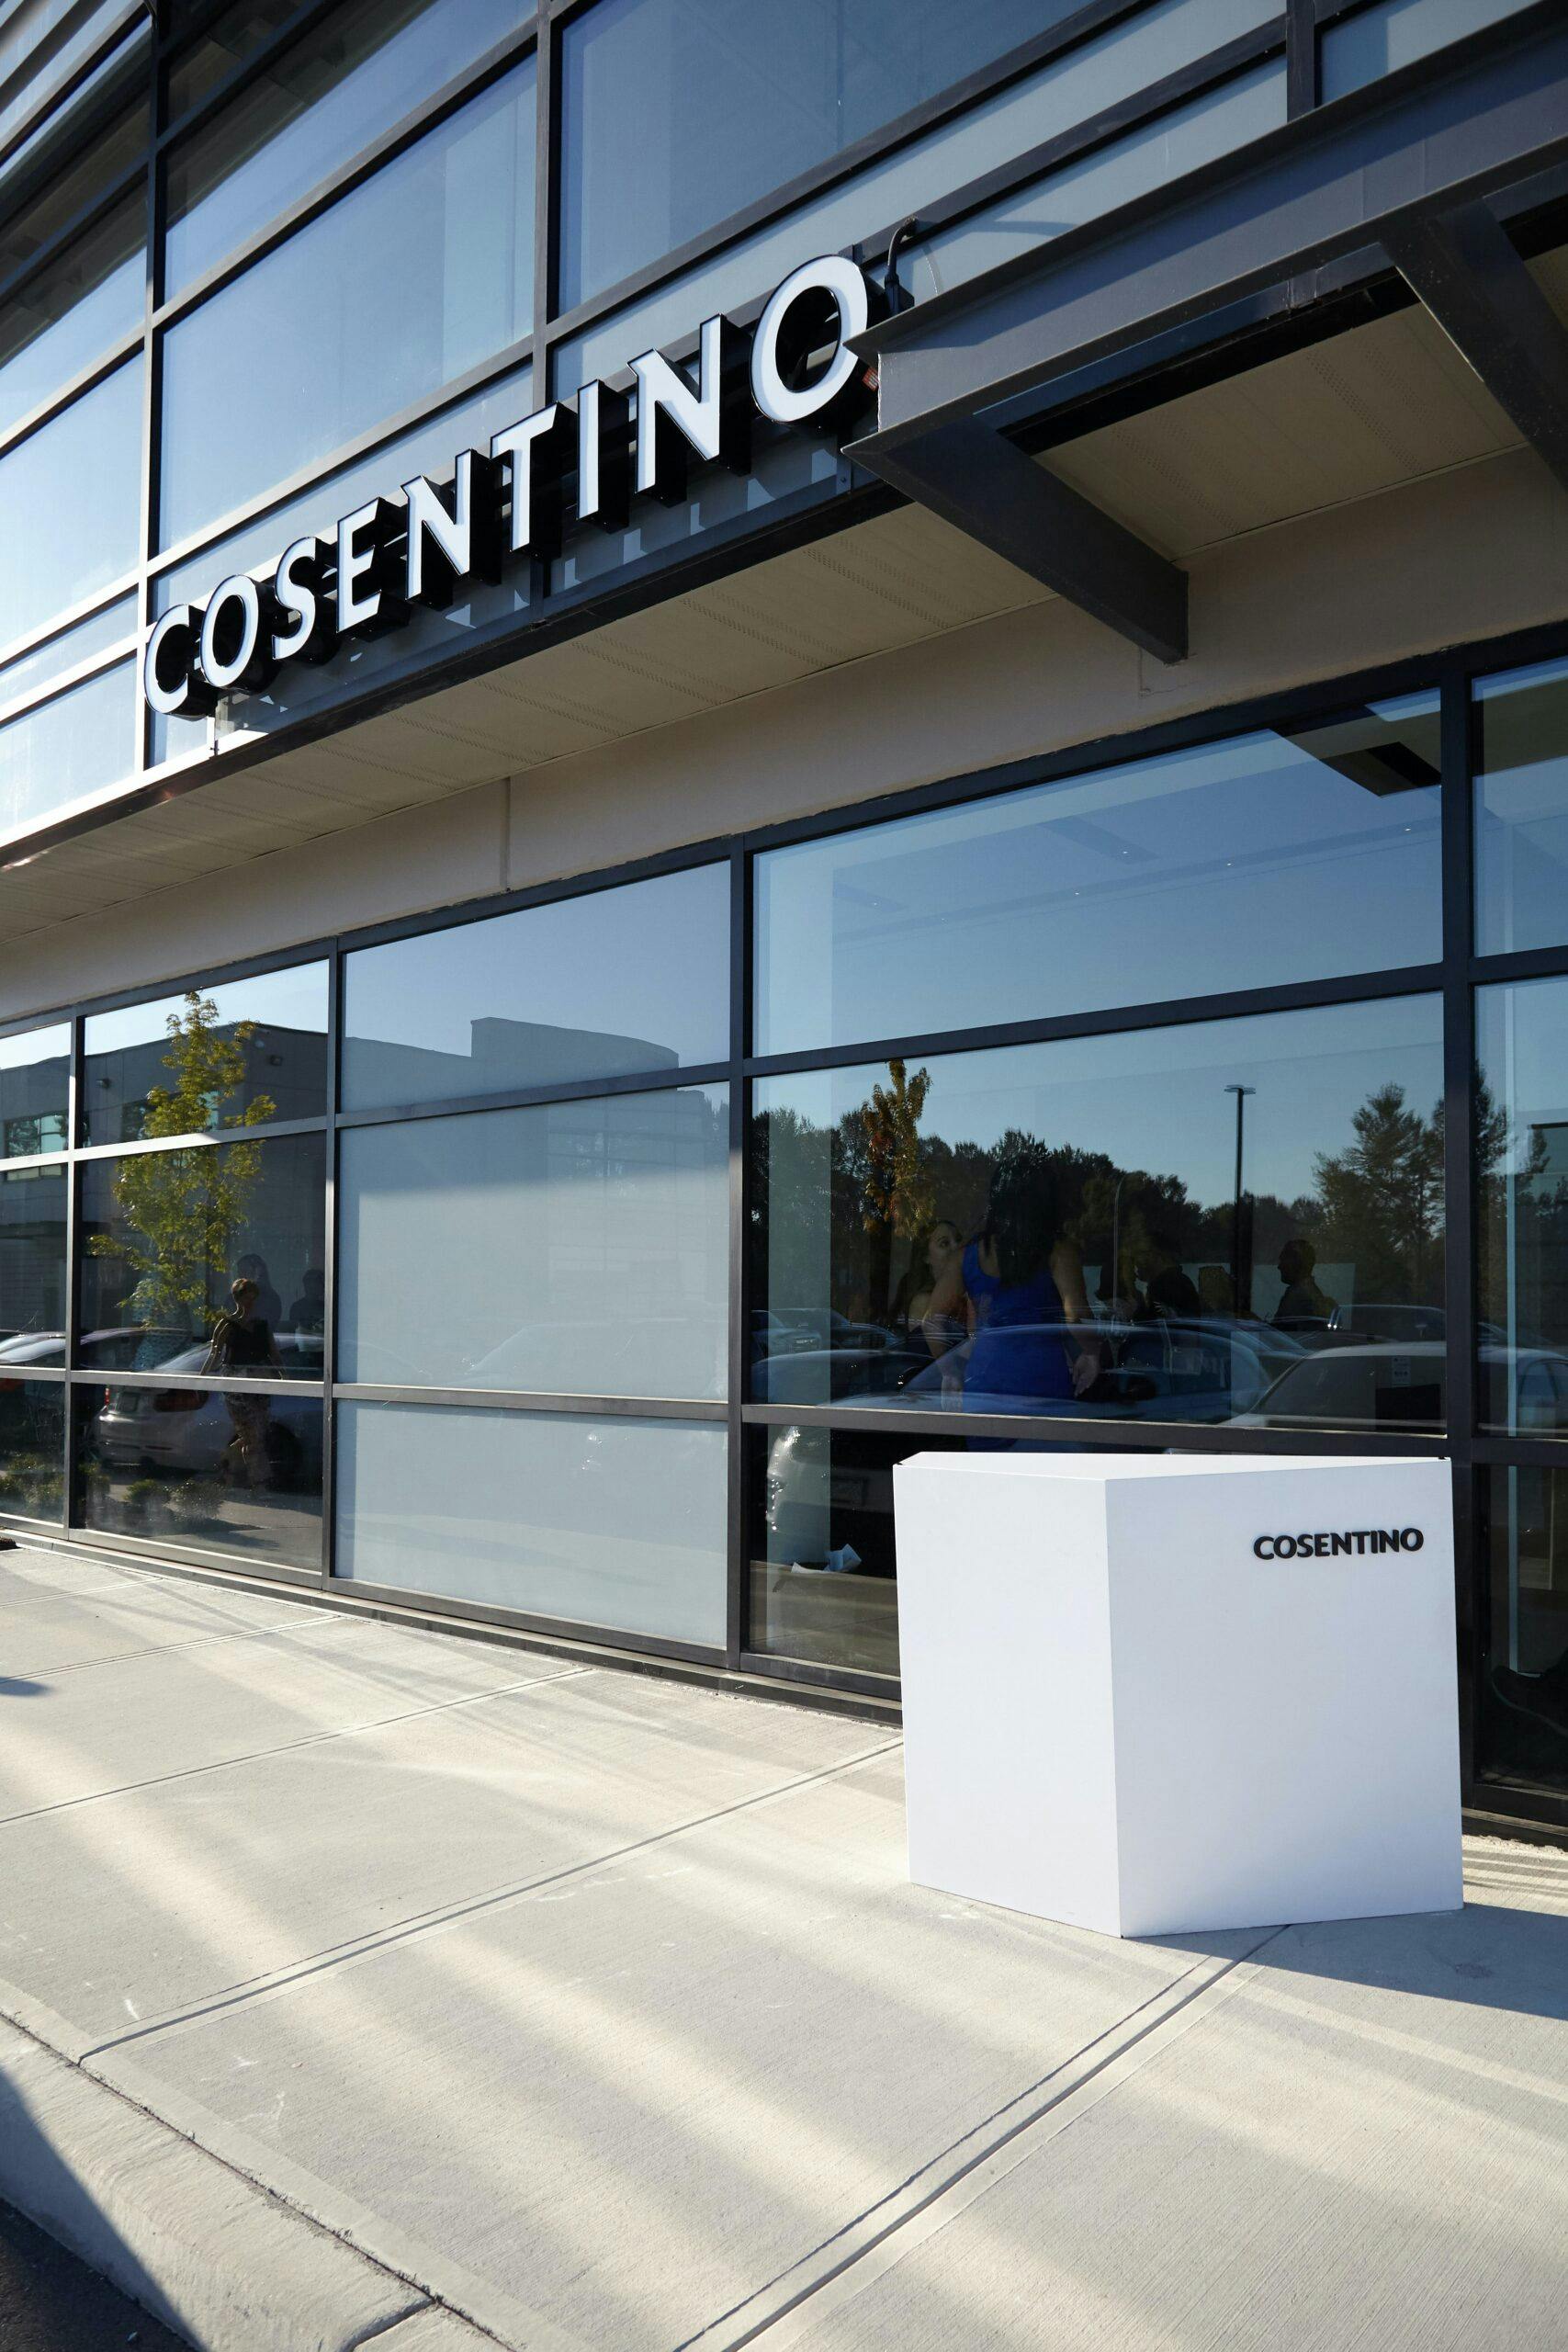 Image 35 of Cosentino Vancouver Center Opening 2018 4 1 scaled in Cosentino Officially Opens New Vancouver Centre Showroom - Cosentino